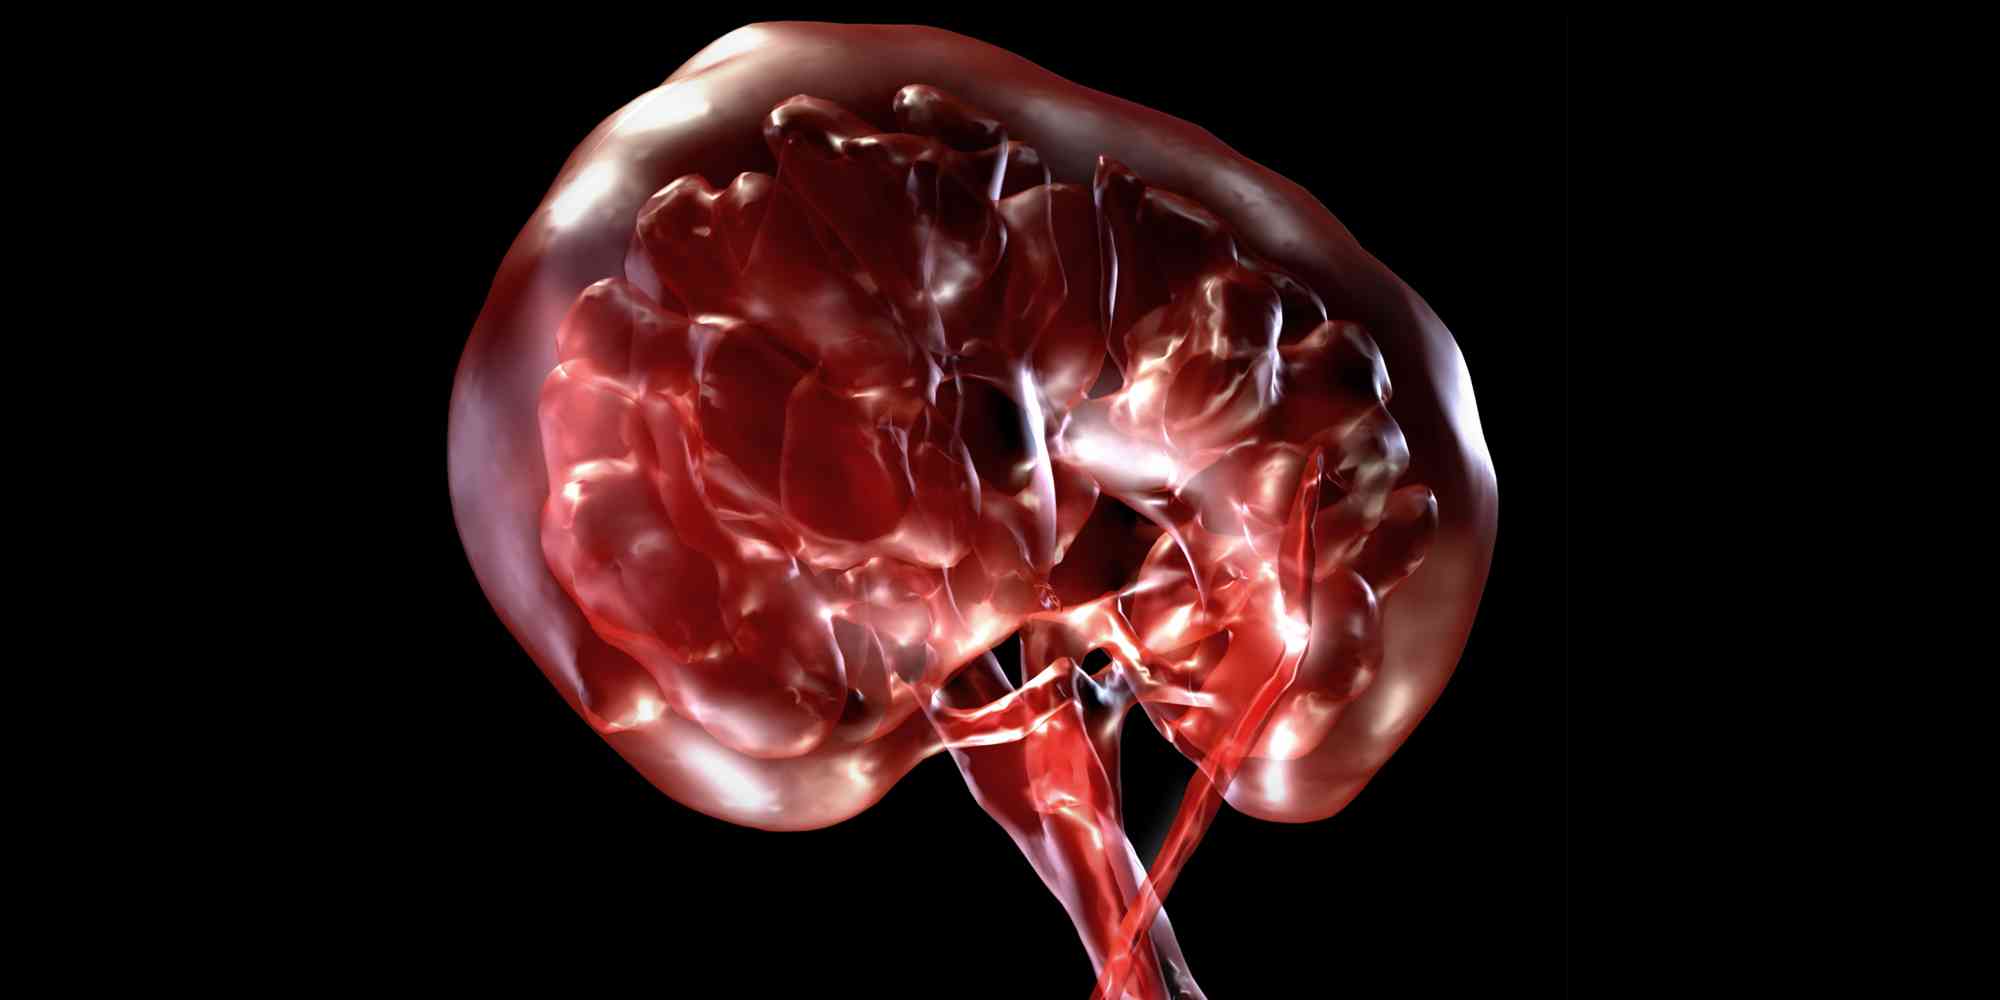 Render of a kidney developed by Dr John McGhee, from the 3D Visual Aesthetics Lab